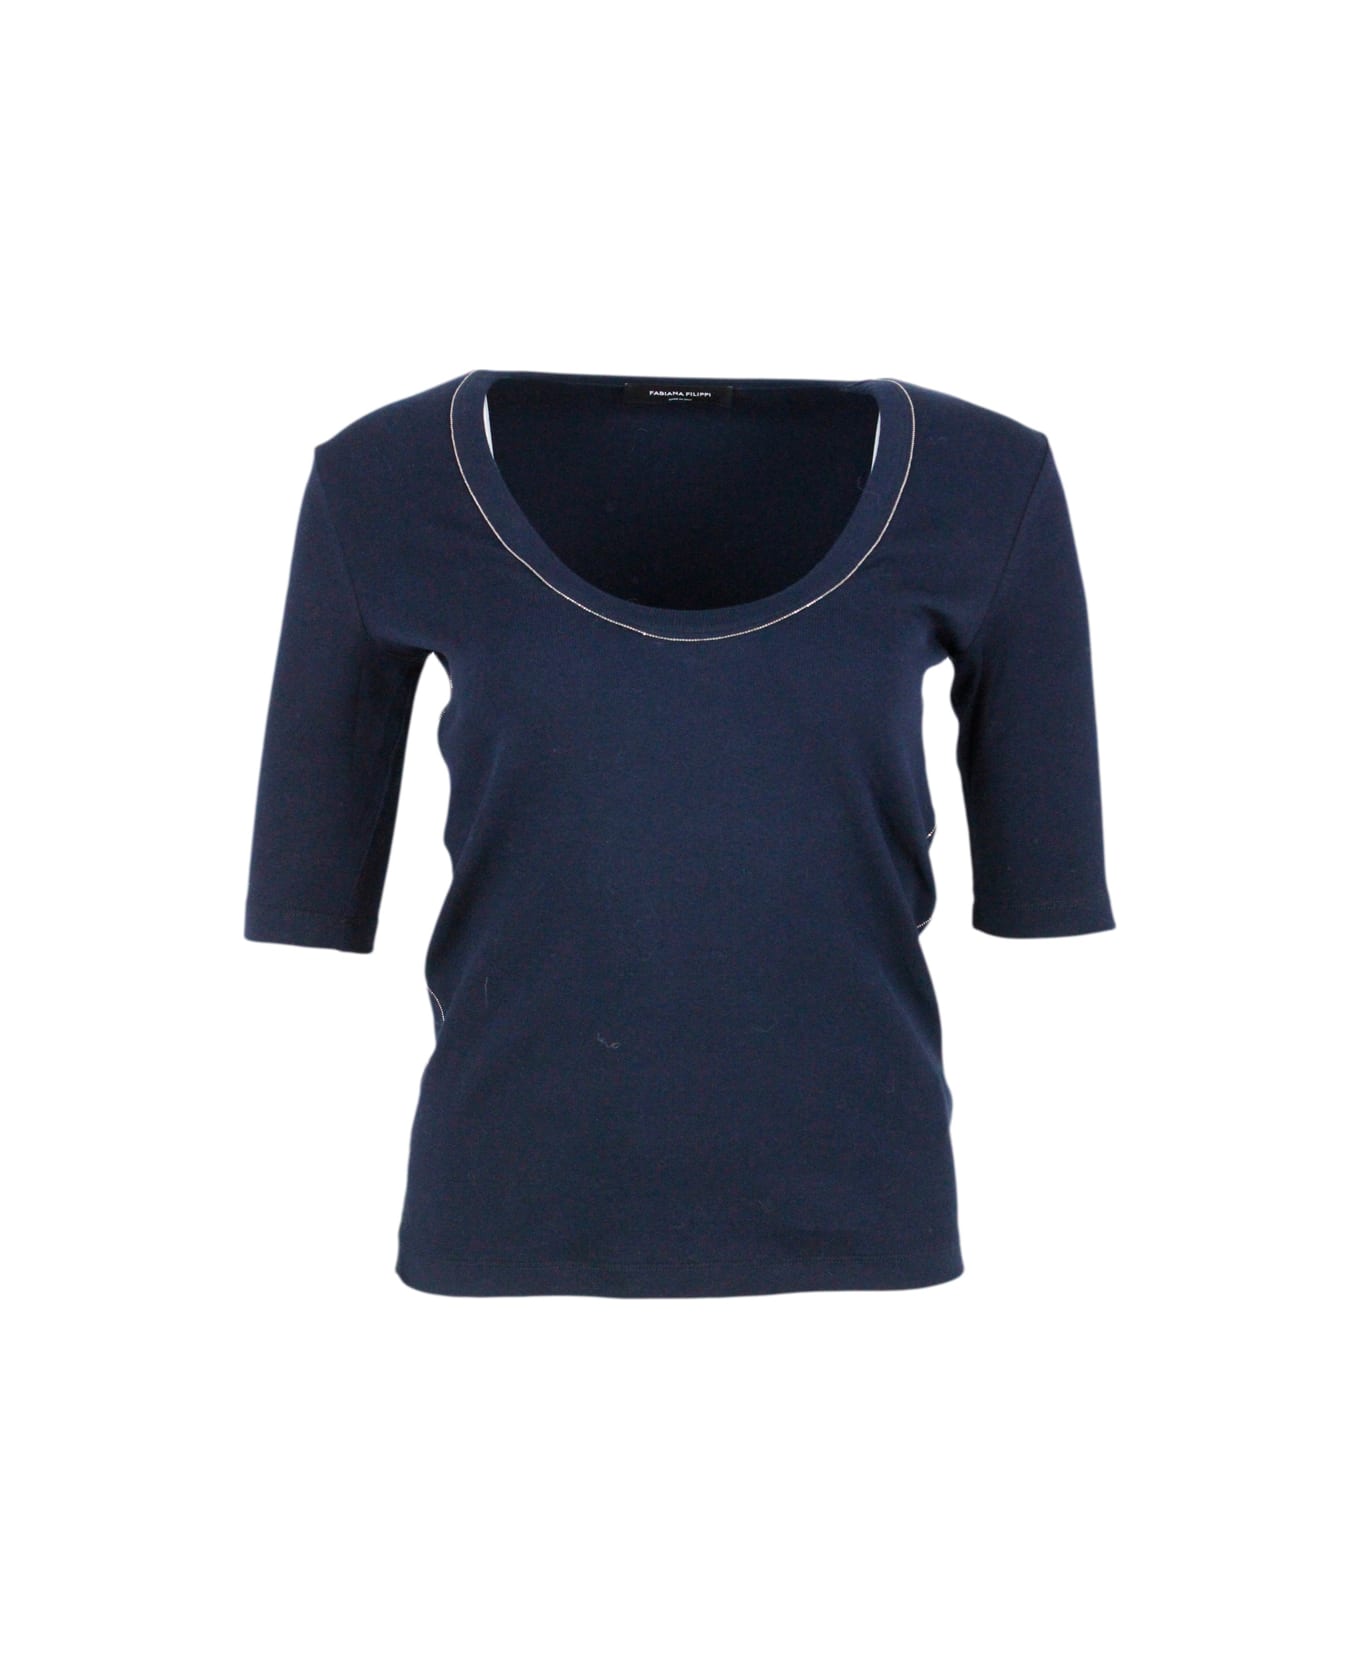 Fabiana Filippi Ribbed Cotton T-shirt With U-neck, Elbow-length Sleeves Embellished With Rows Of Monili On The Neck And Sides - Blue